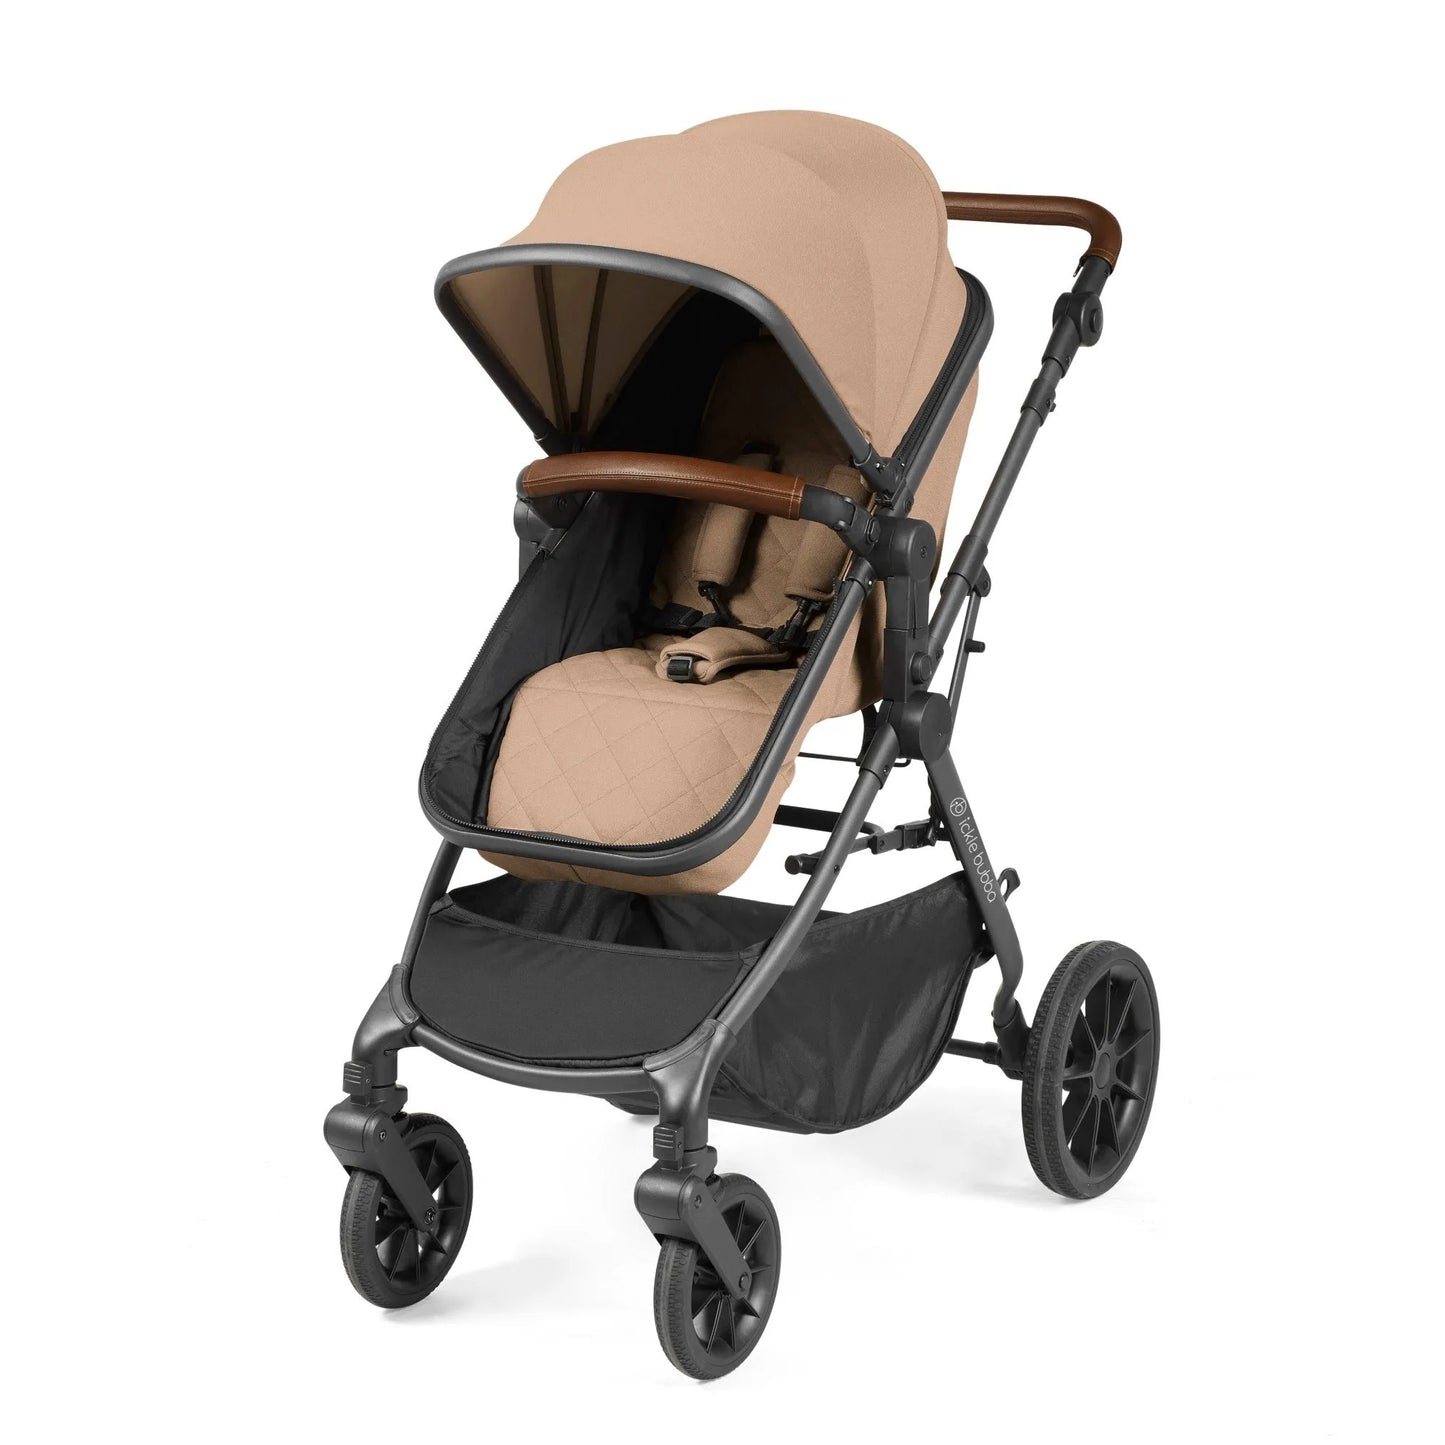 Ickle Bubba Cosmo All in One i-Size Travel System with ISOFIX Base - Desert *PRE ORDER END NOVEMBER